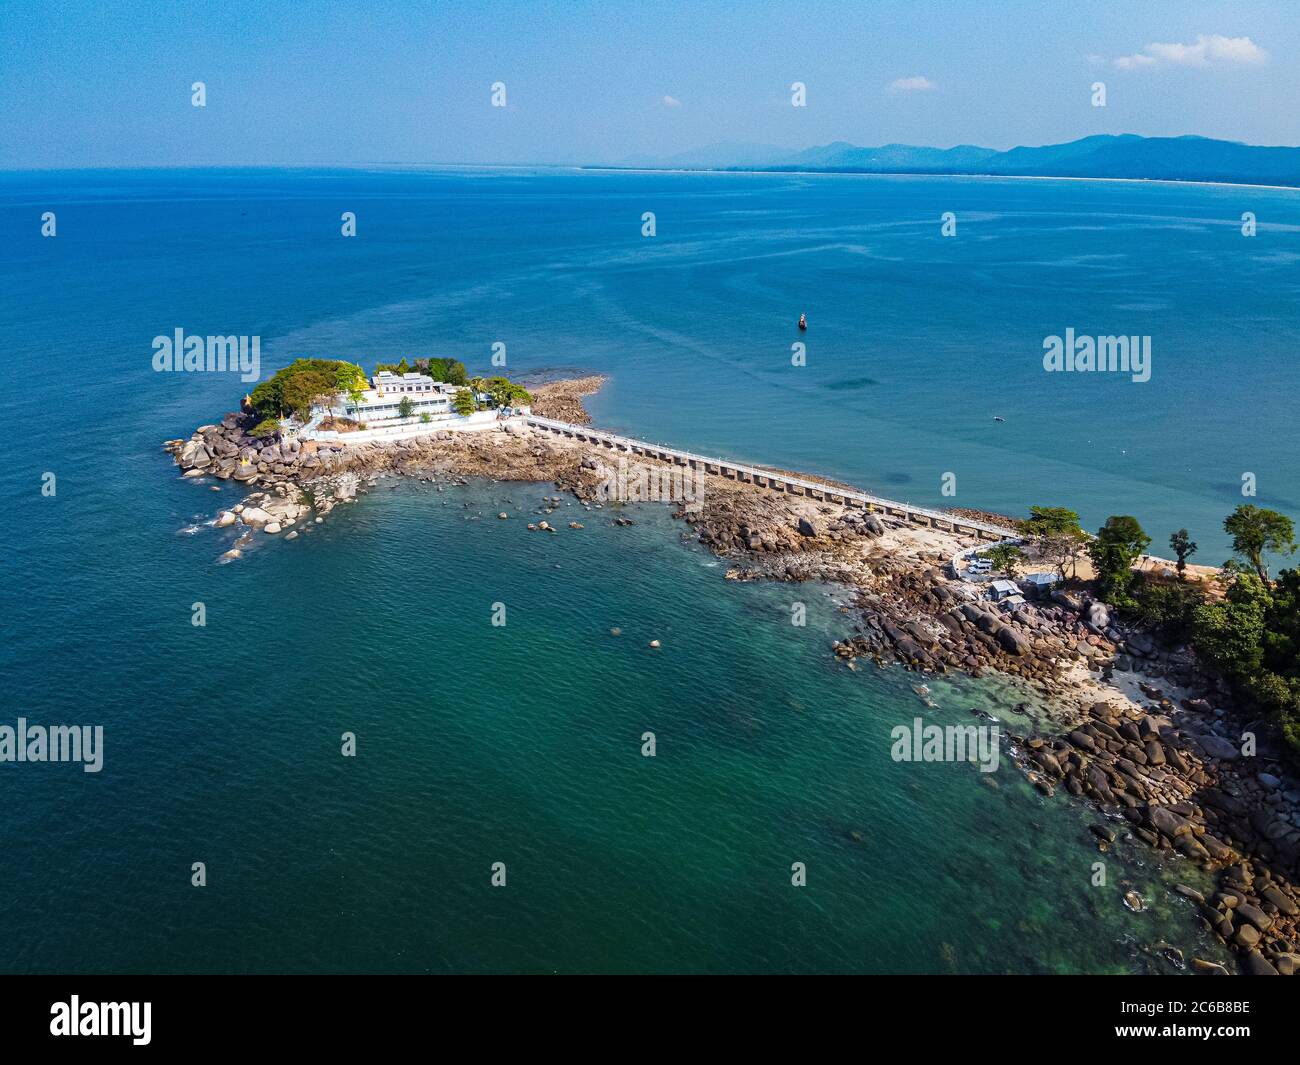 Aerial by drone of the Myaw Yit Pagoda in the ocean near Dawei, Mon state, Myanmar (Burma), Asia Stock Photo